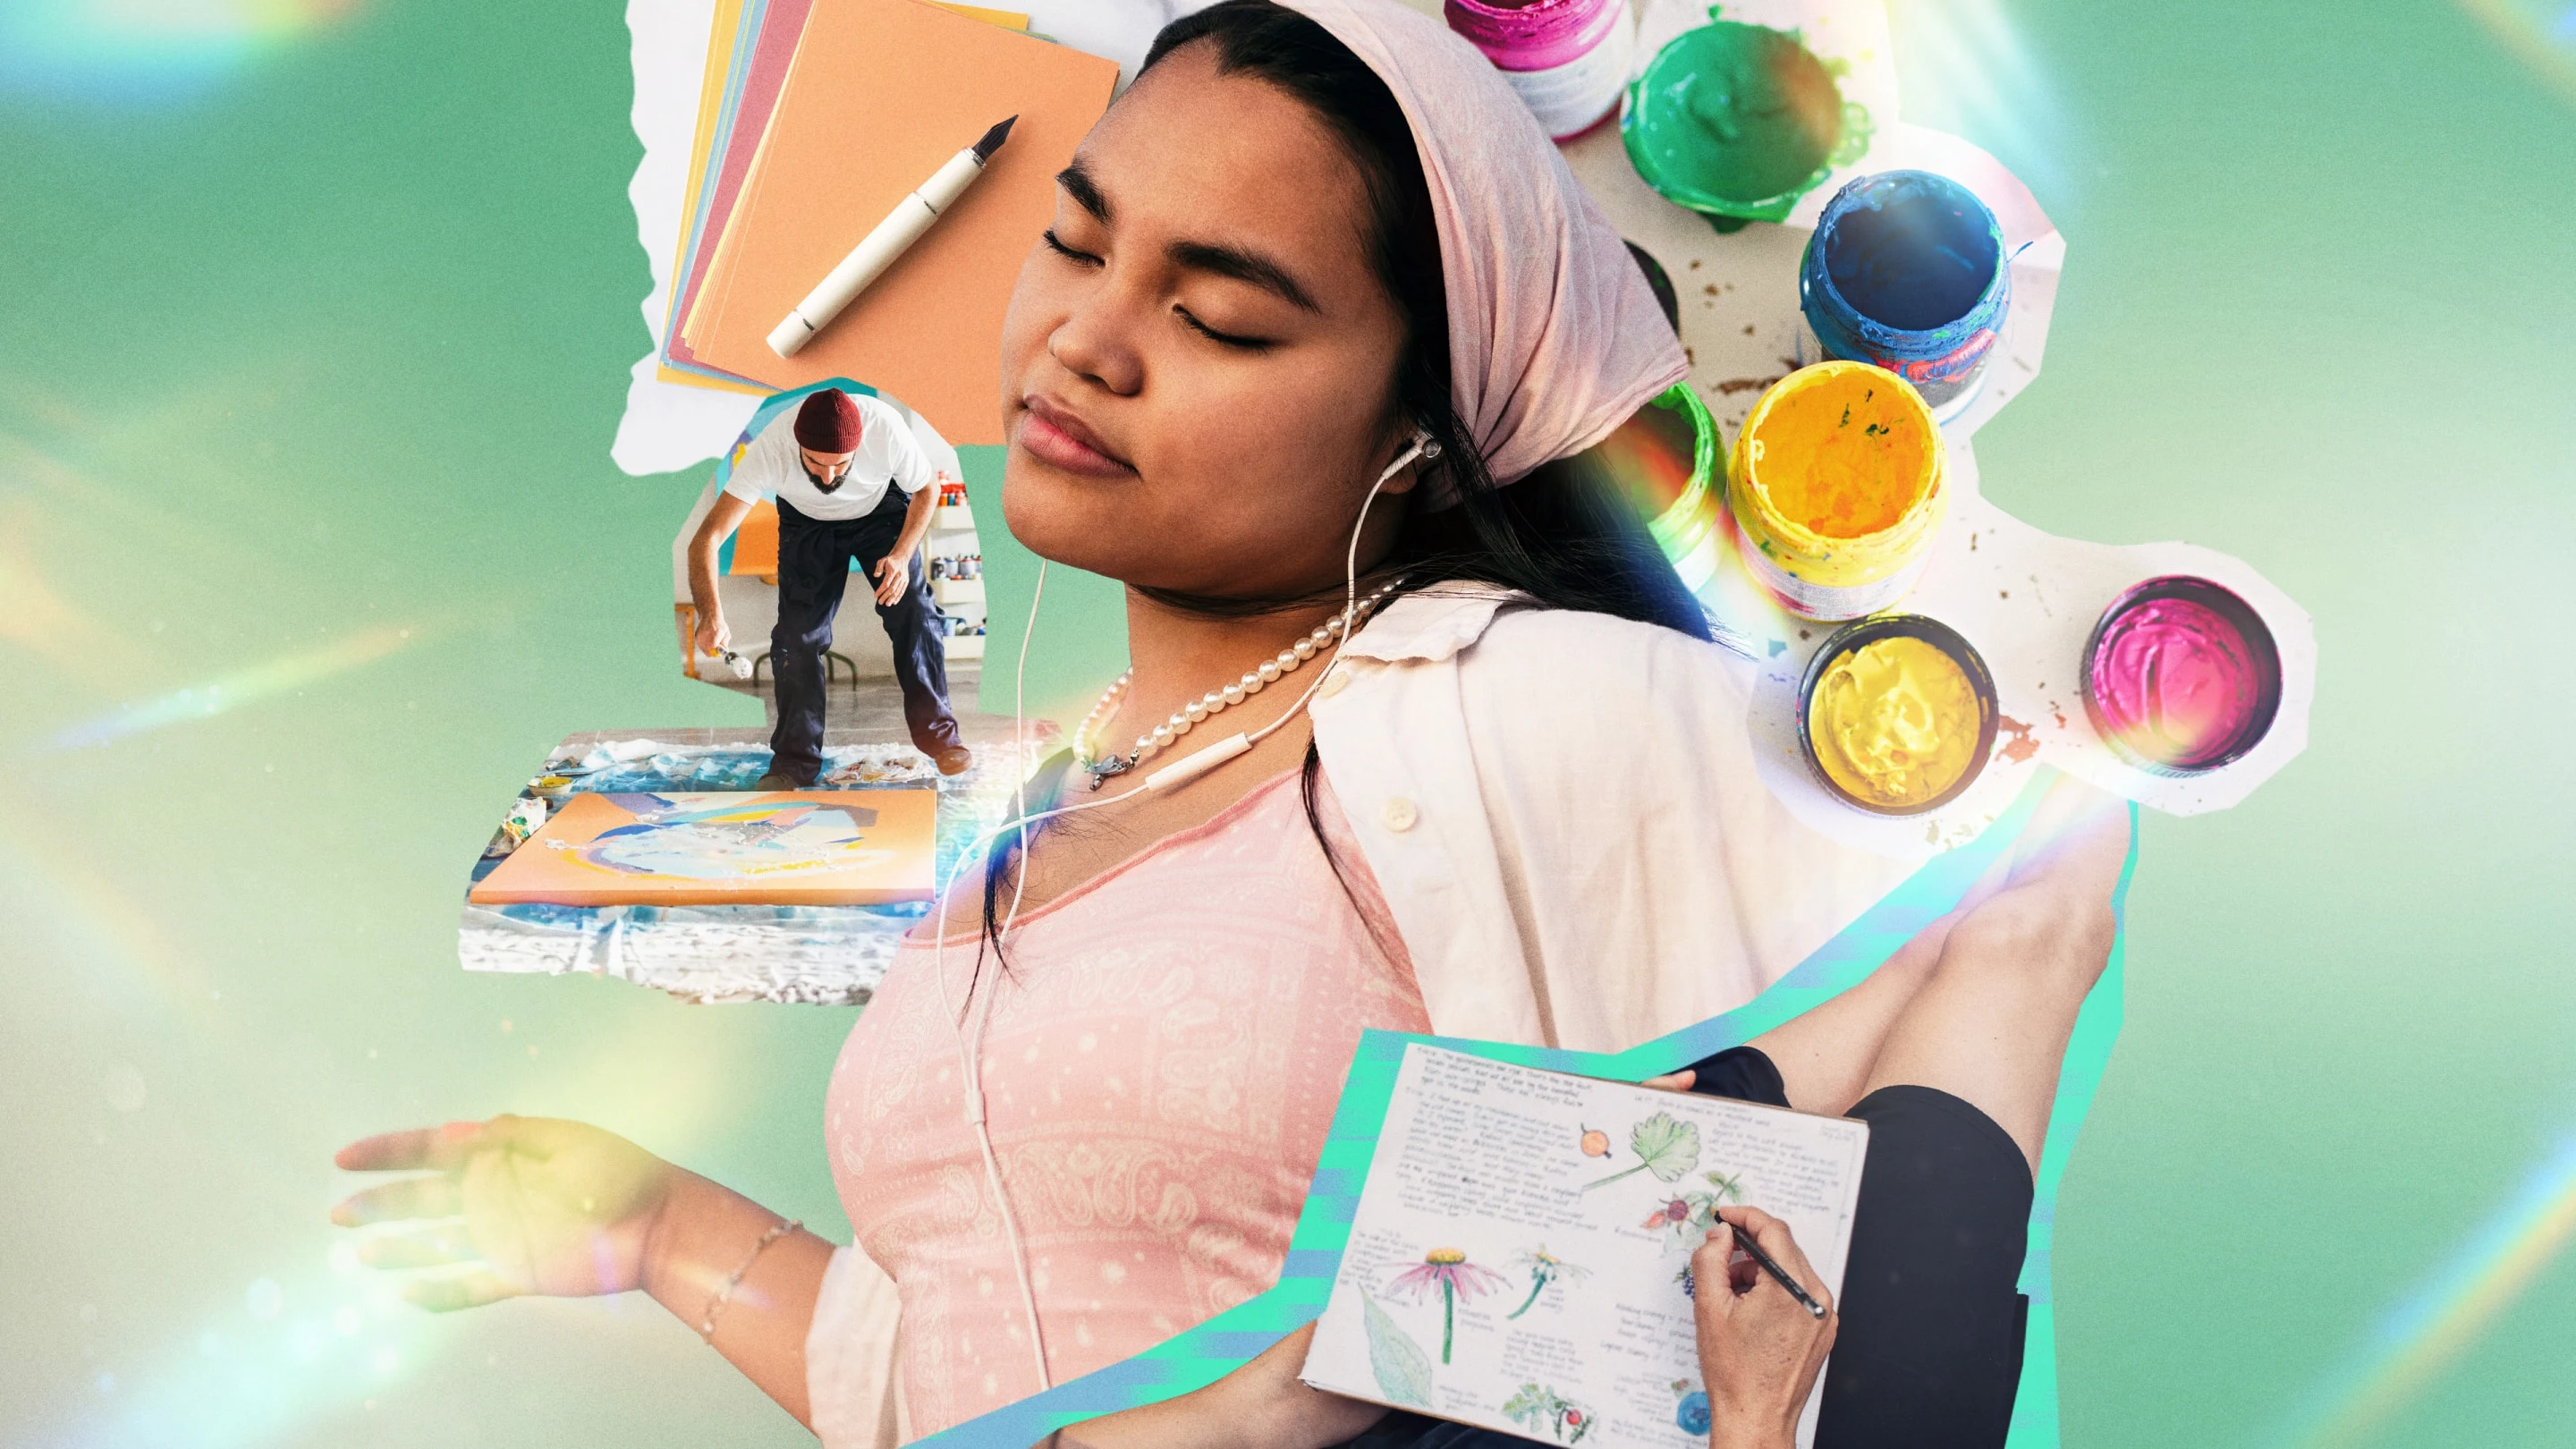 Collage featuring an Asian woman listening to music surrounded by watercolour paints, a woman journalling, a man spray painting a canvas and a stack of paper under a pen.